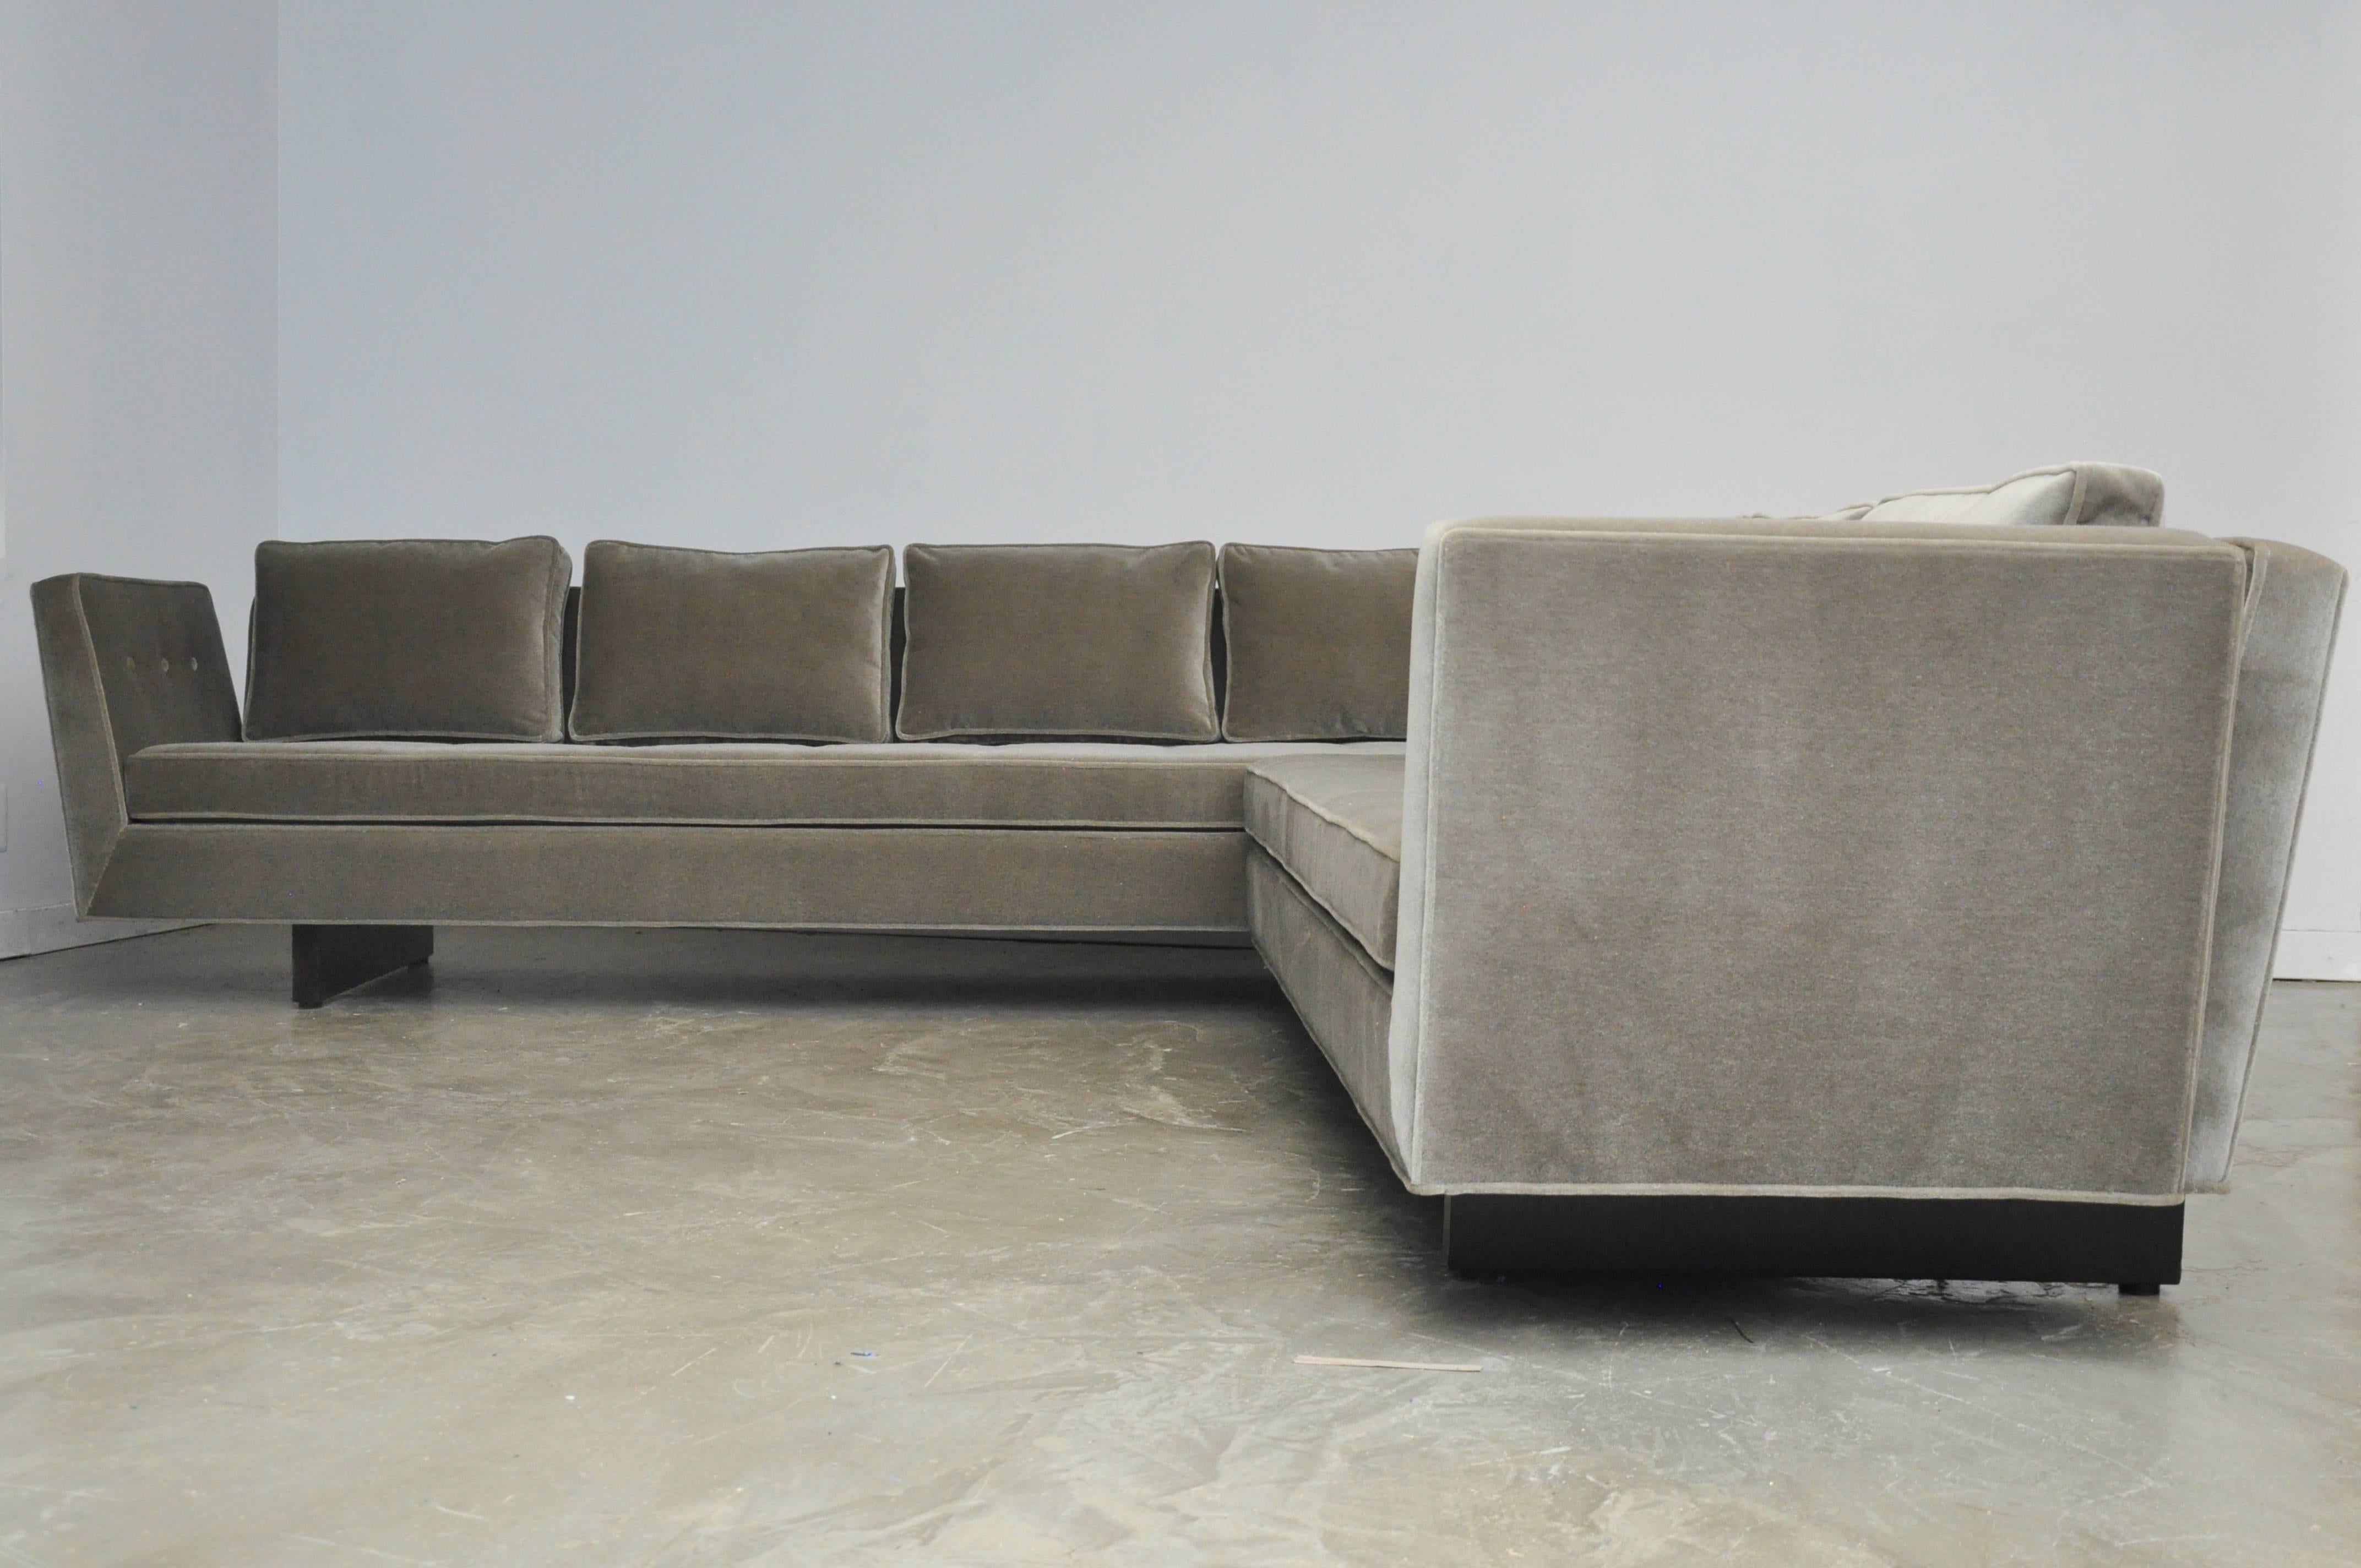 Rare open-arm sectional sofa with exposed bracket back frames. Fully restored and reupholstered. New grey mohair upholstery with Dunbar espresso finish frames.